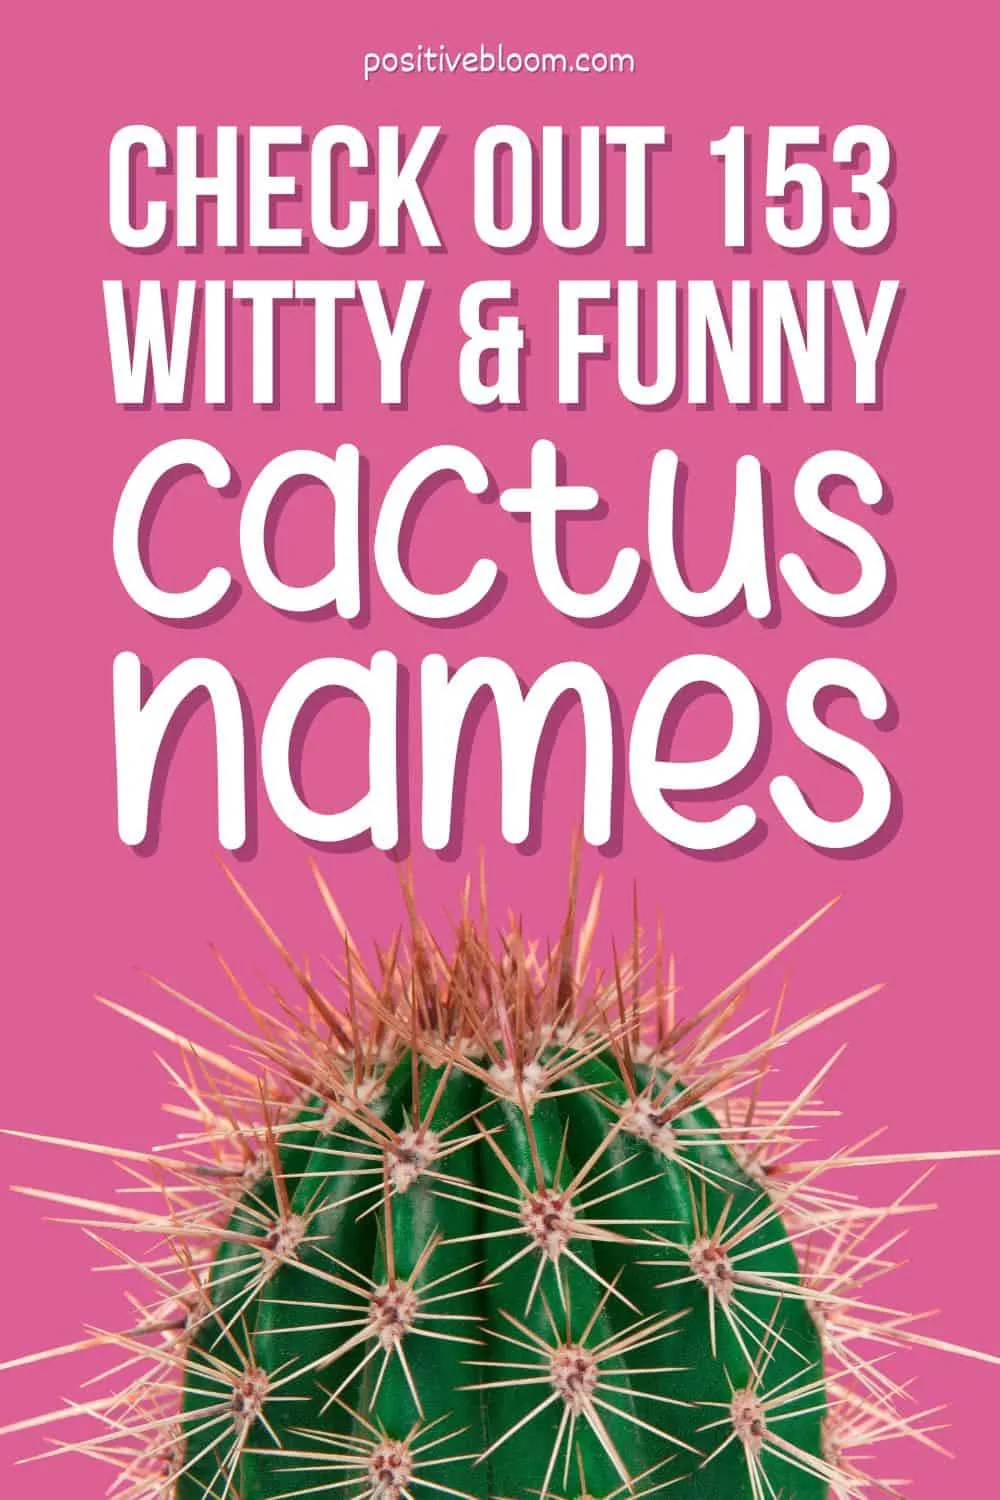 Check Out 153 Witty And Funny Cactus Names! Pinterest